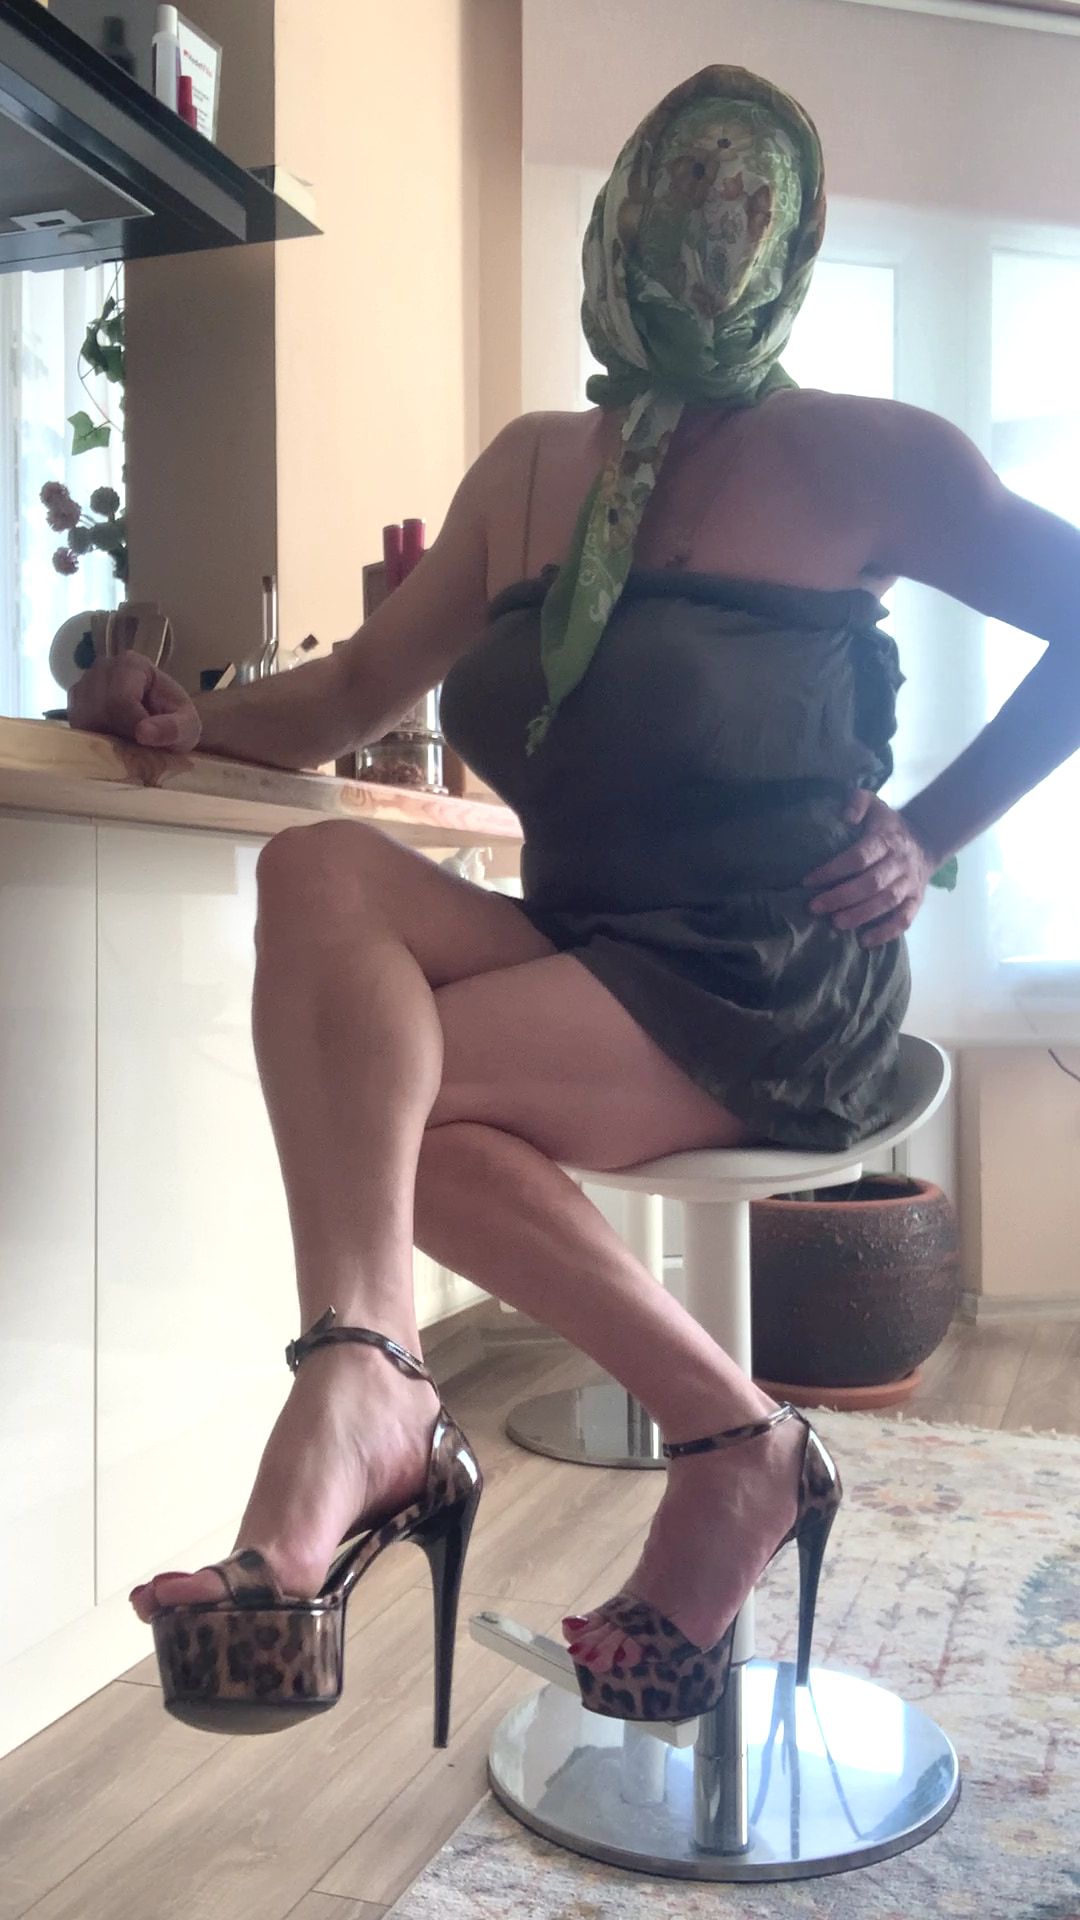  My stepmom is so horny, her husband doesn't fuck her